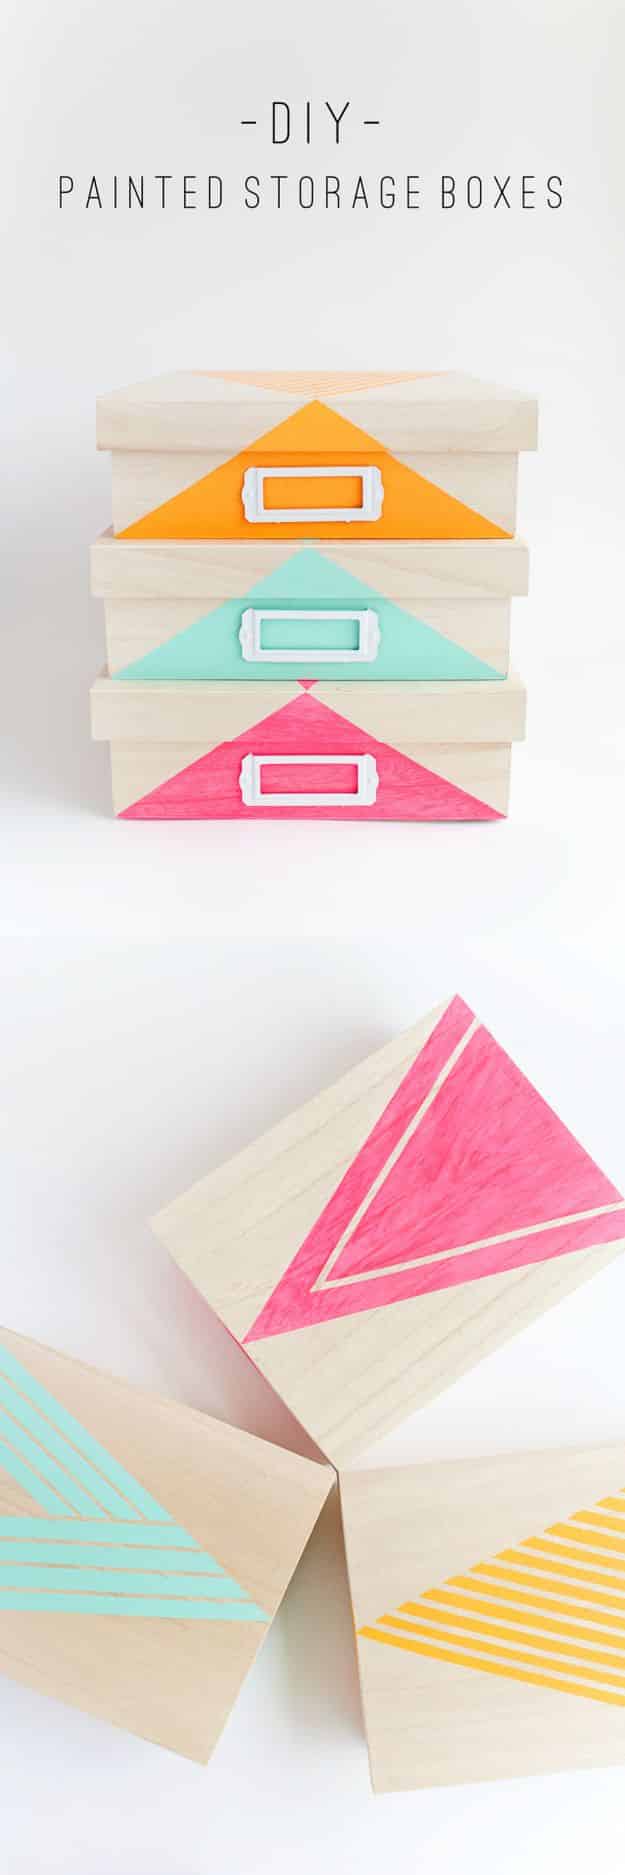 Cheap Last Minute Gifts DIY - DIY Painted Storage Boxes - Inexpensive DIY Gift Ideas To Make On A Budget - Homemade Christmas and Birthday Presents to Make For Mom, Dad, Daughter & Son, Kids, Friends and Family - Cool and Creative Crafts, Home Decor and Accessories, Fun Gadgets and Phone Stuff - Quick Gifts From Dollar Tree Items #diygifts #cheapgifts #christmasgifts